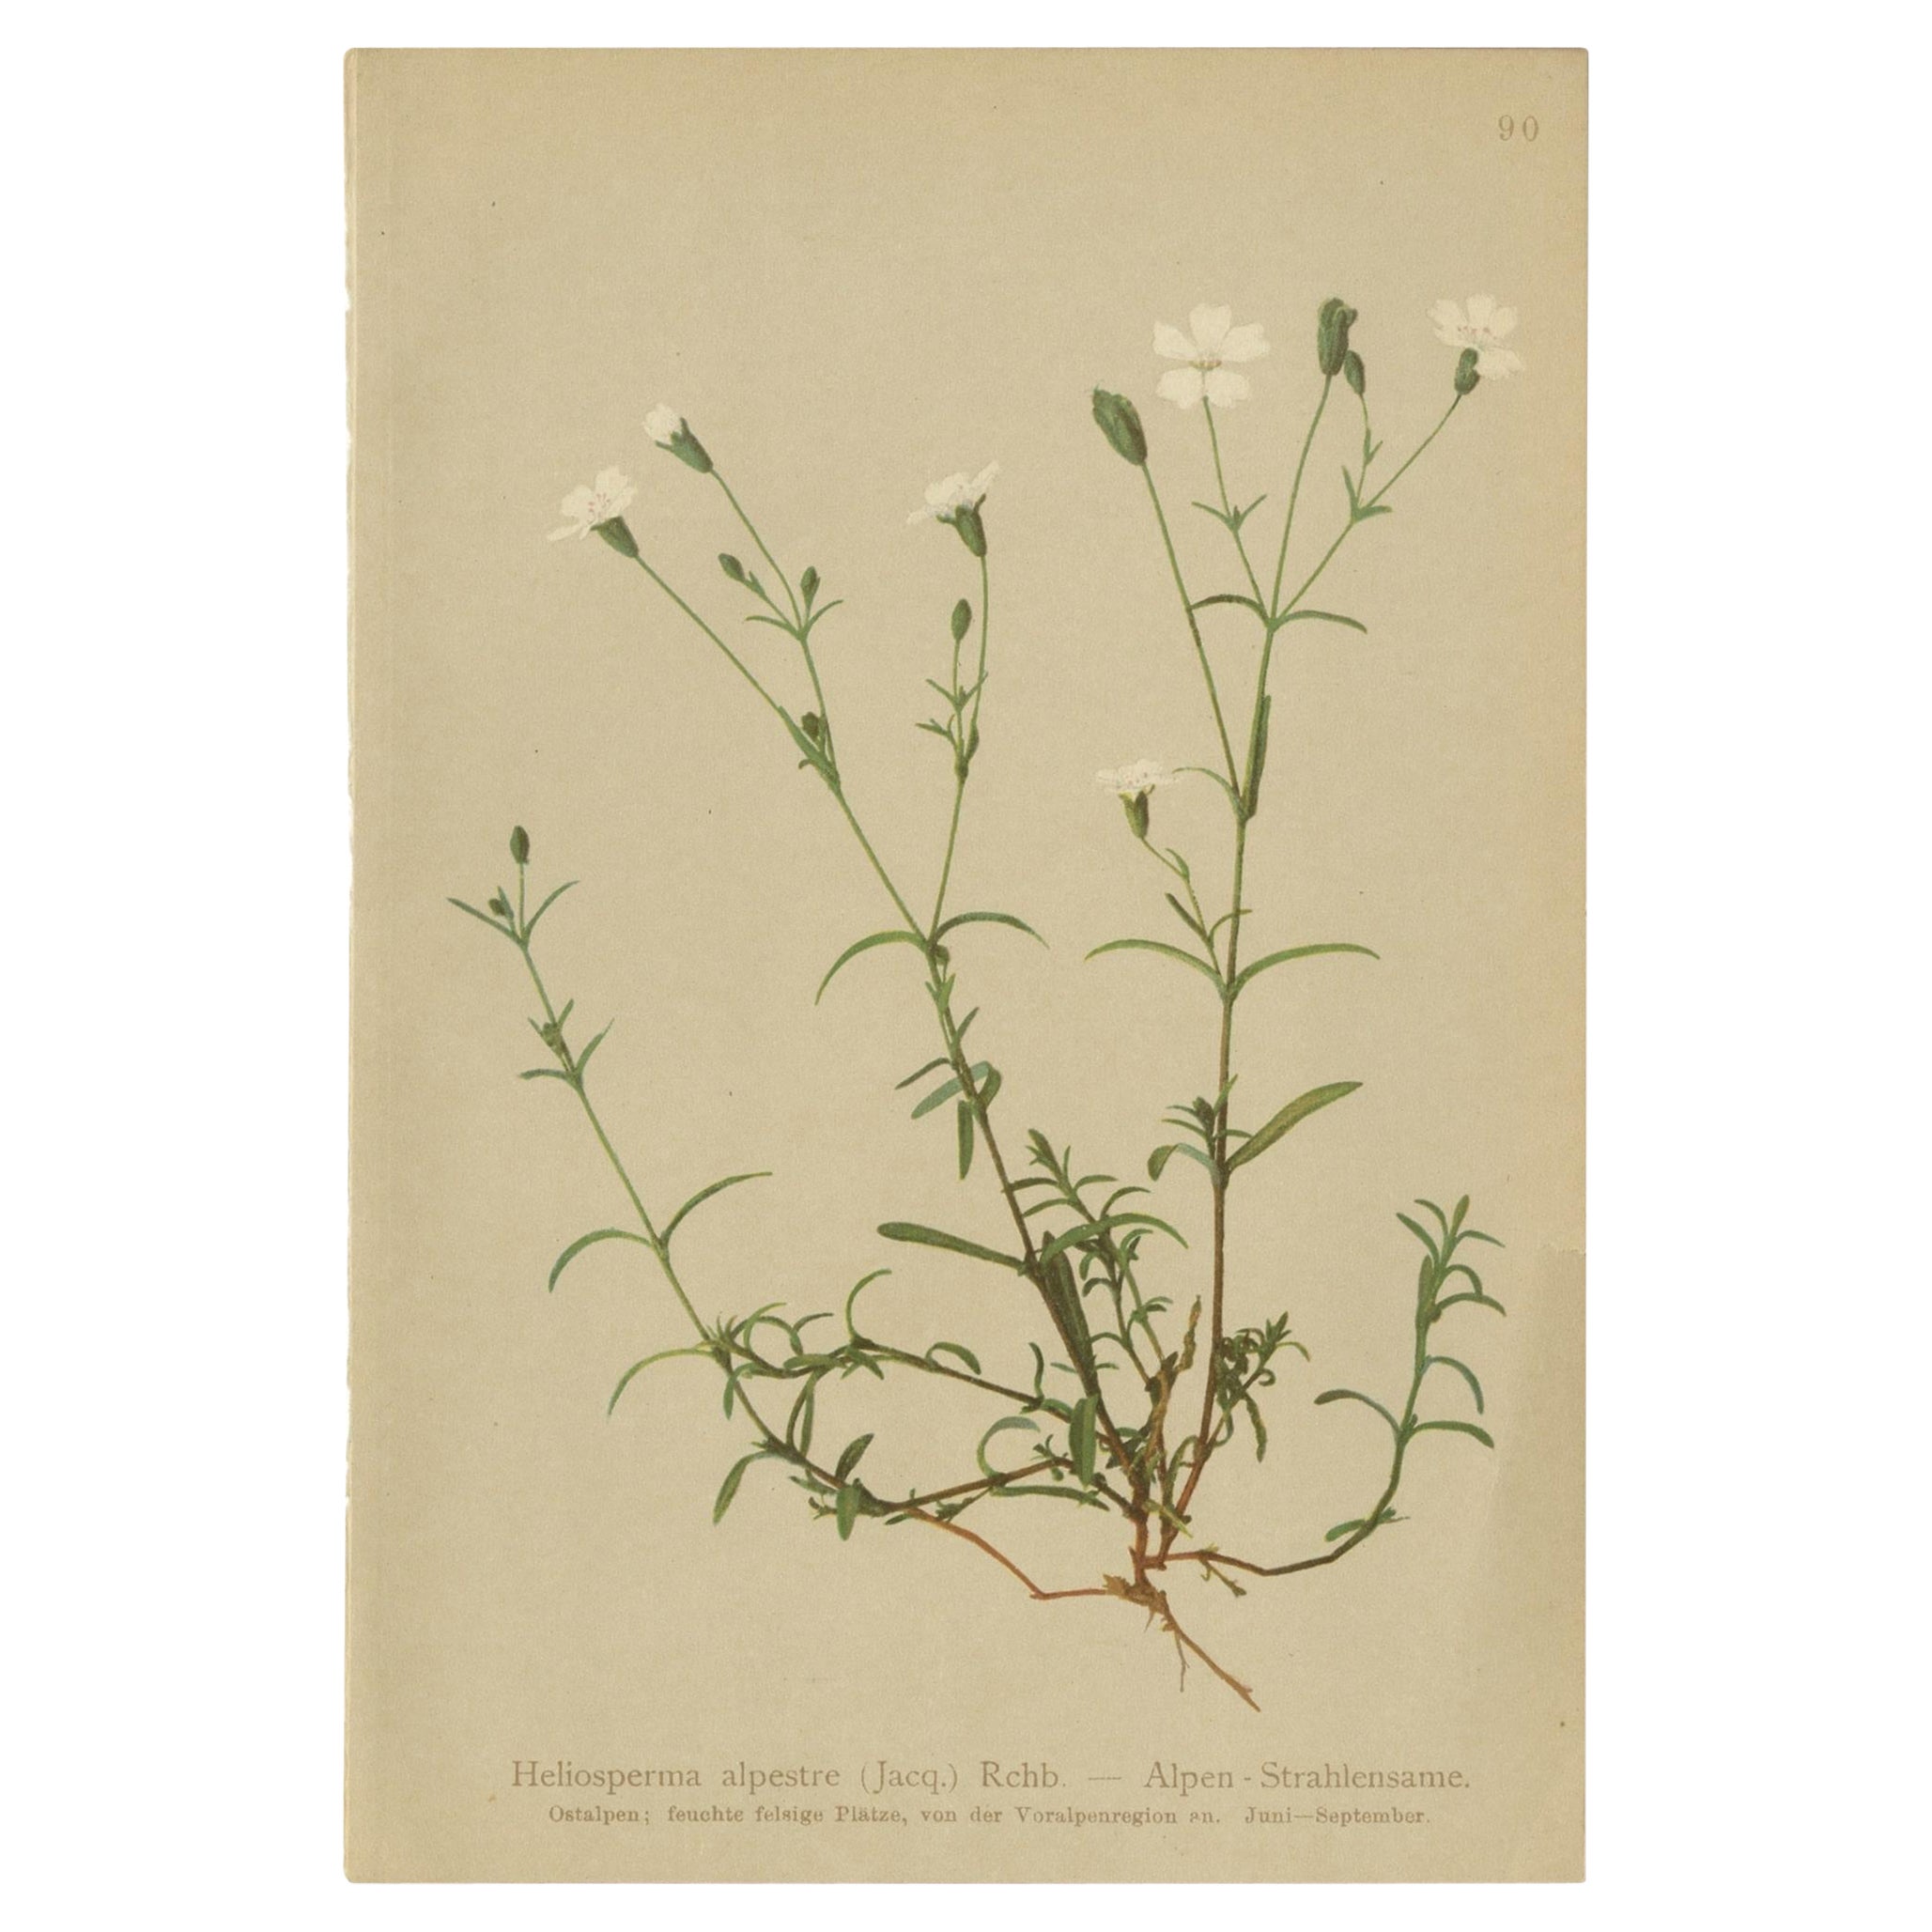 Antique Botany Print of The Heliosperma Plant by Palla, 1897